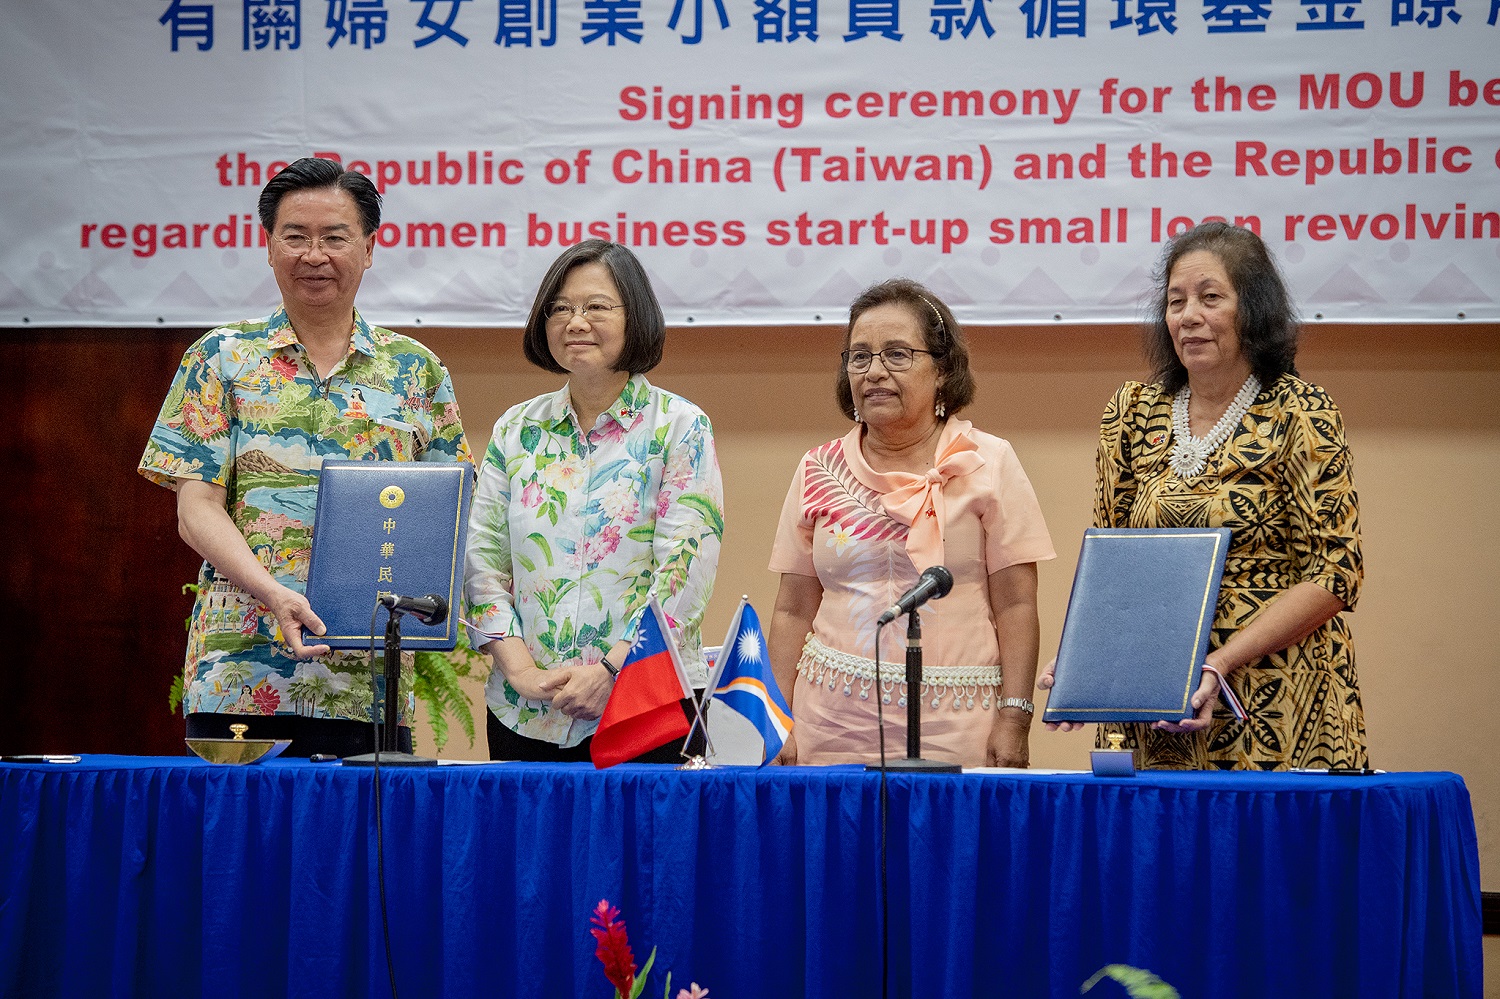 President Tsai witnesses signing of Taiwan-Marshall Islands MOU for Women Business Start-up Small Loan Revolving Fund